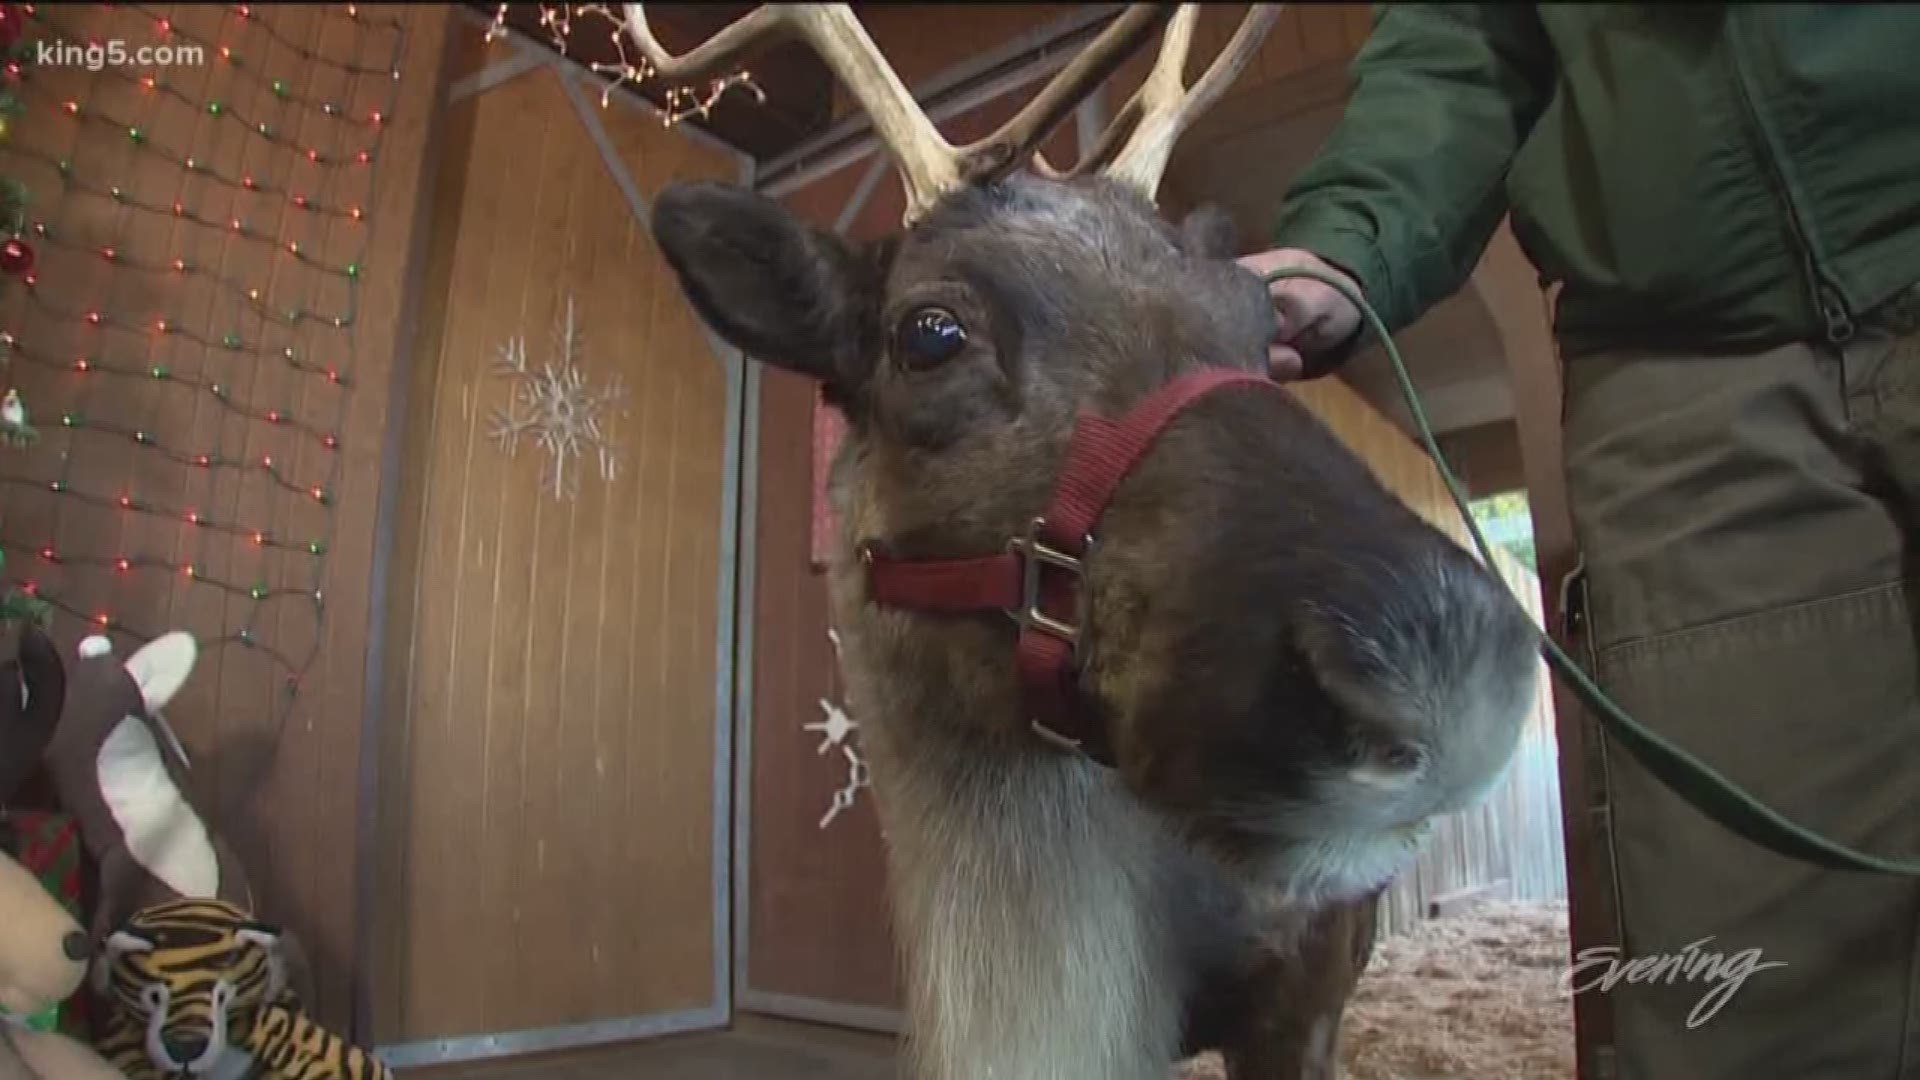 The Reindeer Festival runs through December 23rd. Cougar Mountain Zoo's 31st annual Reindeer Festival features Santa's house, where kids can meet and greet with the jolly guy himself and hang out in Santa's sleigh.